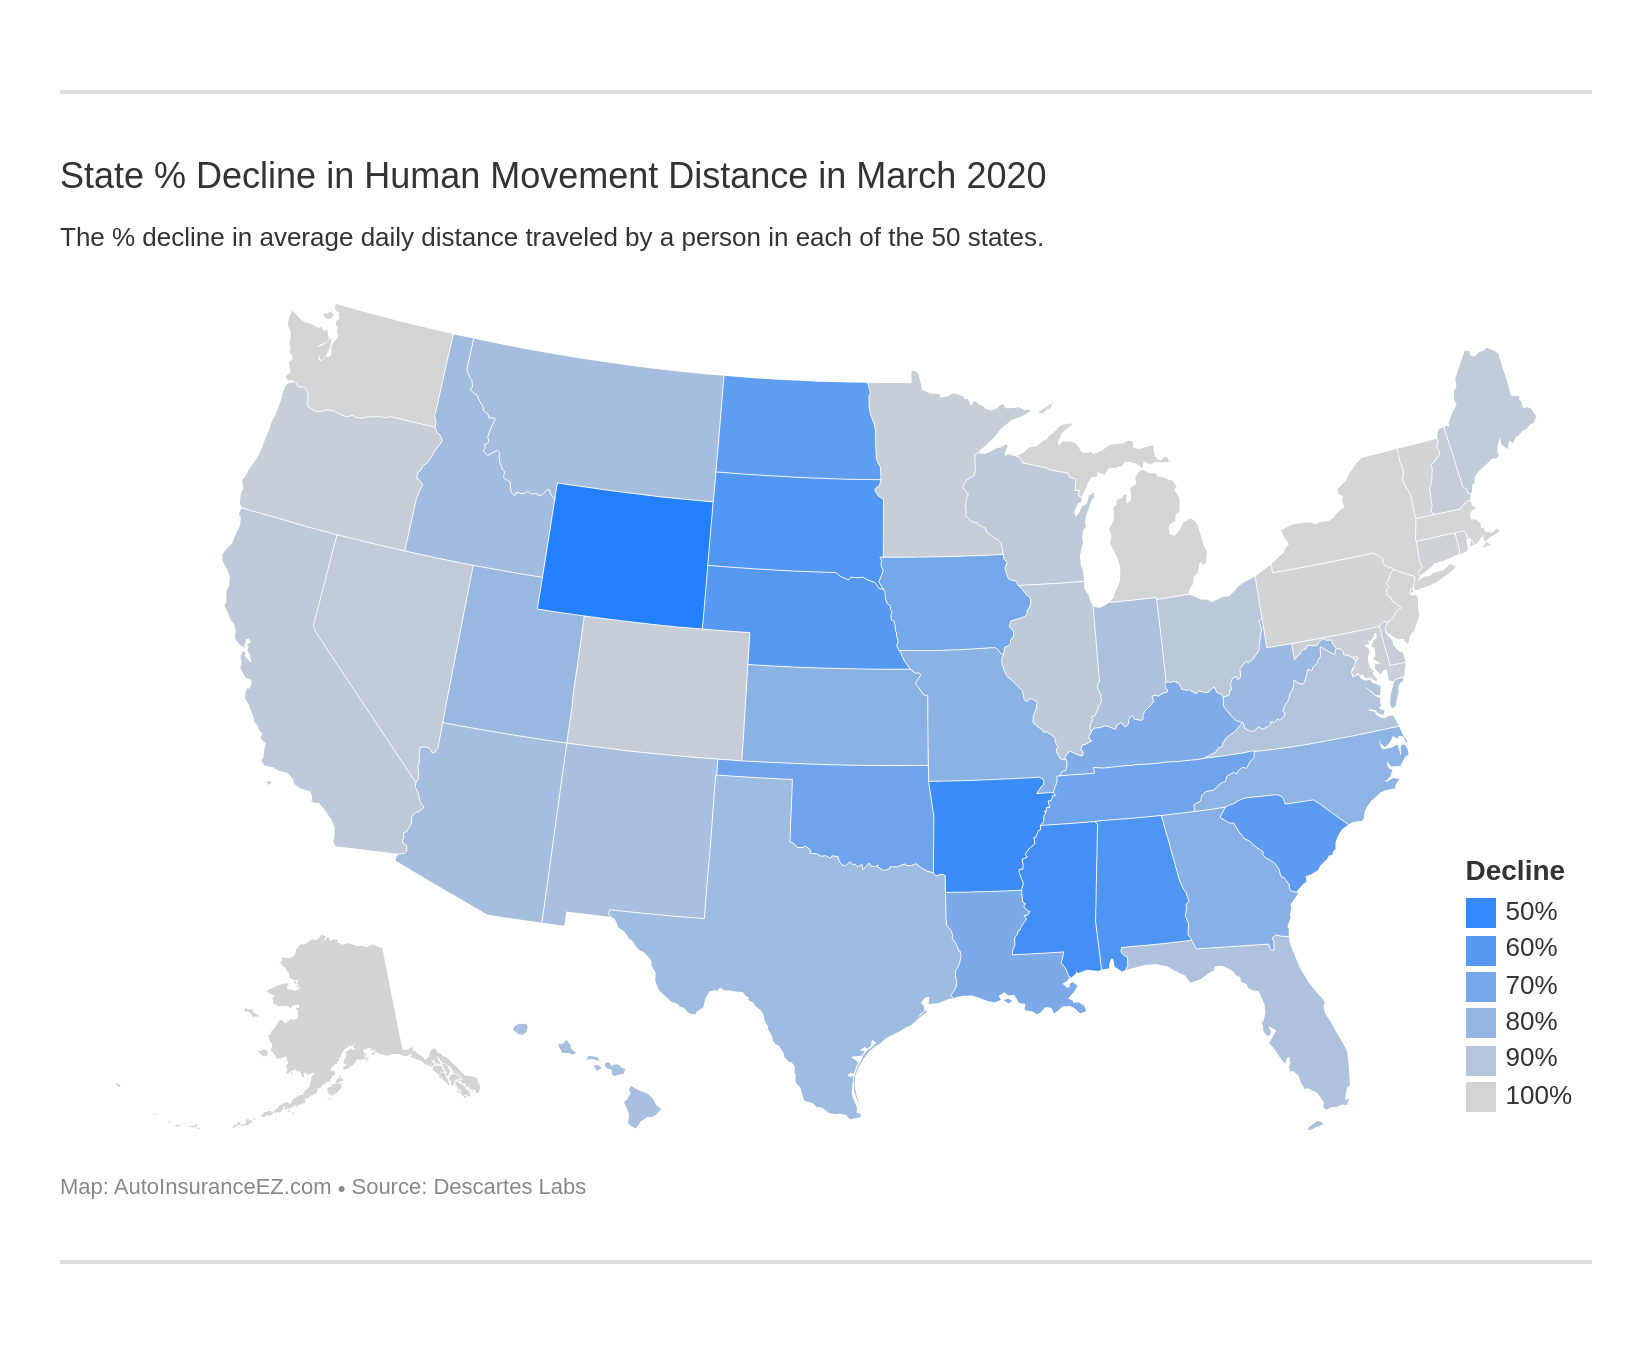 State % Decline in Human Movement Distance in March 2020